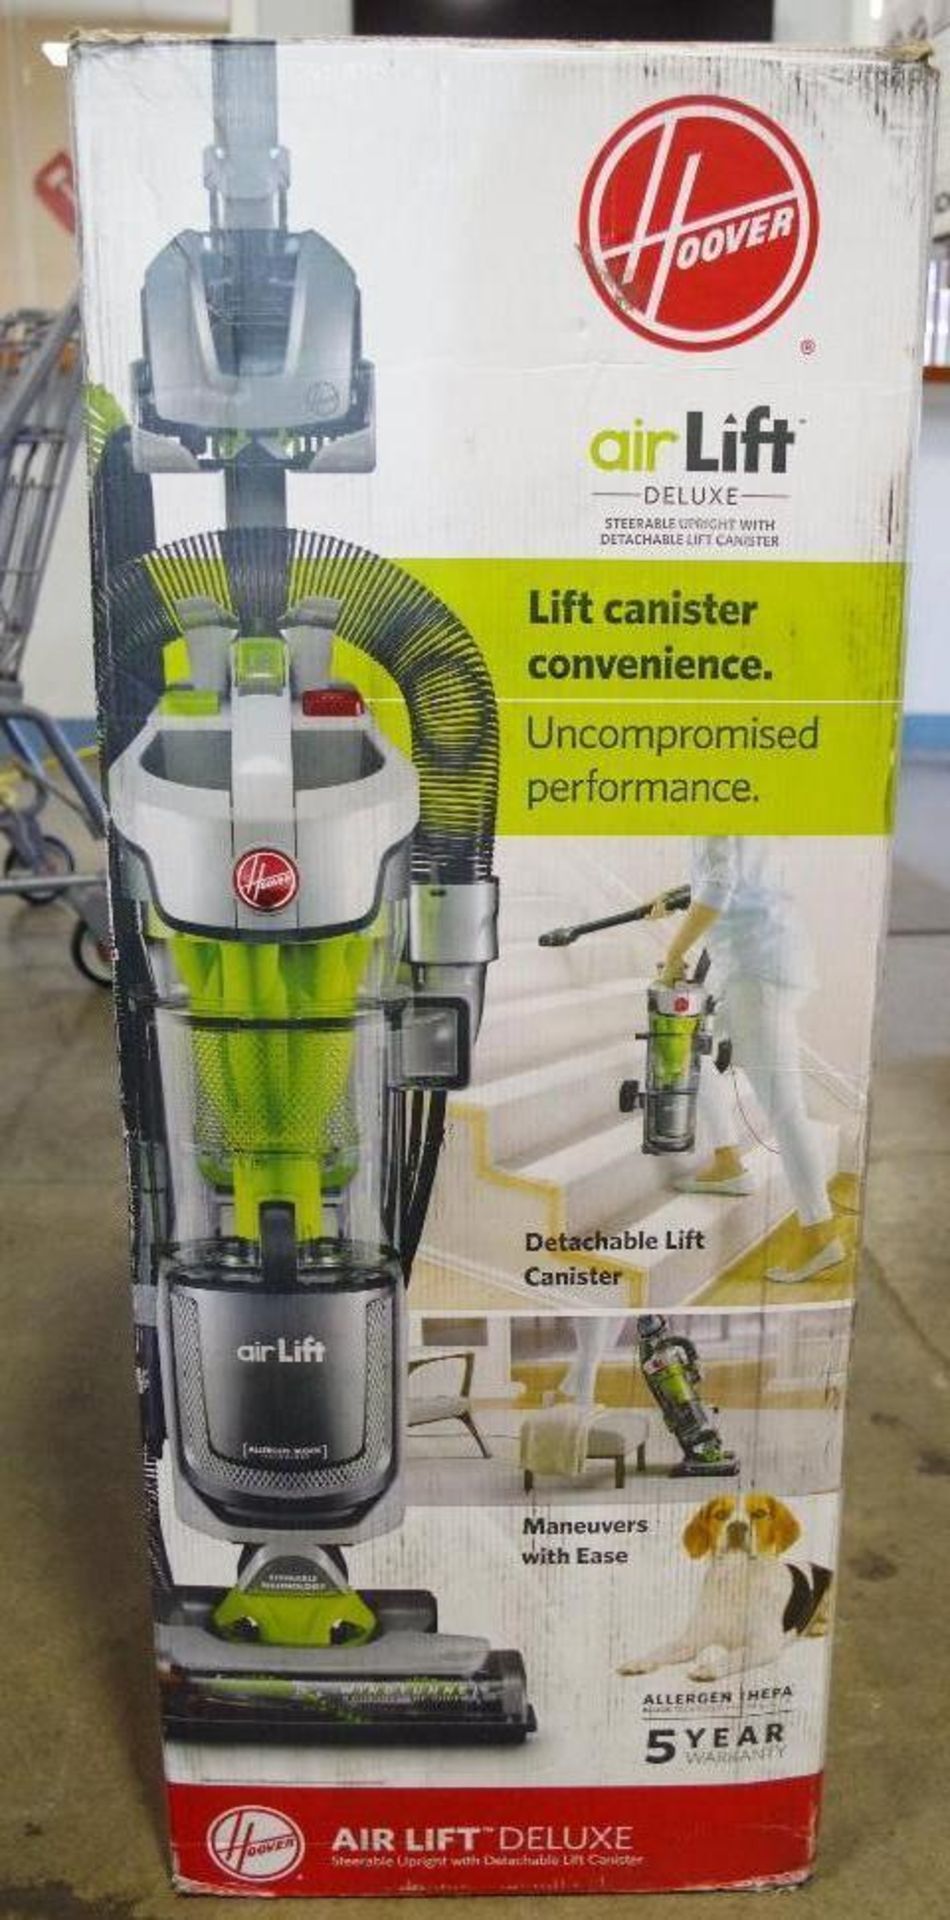 NEW HOOVER Air Lift Bagless Upright Deluxe Vacuum Cleaner